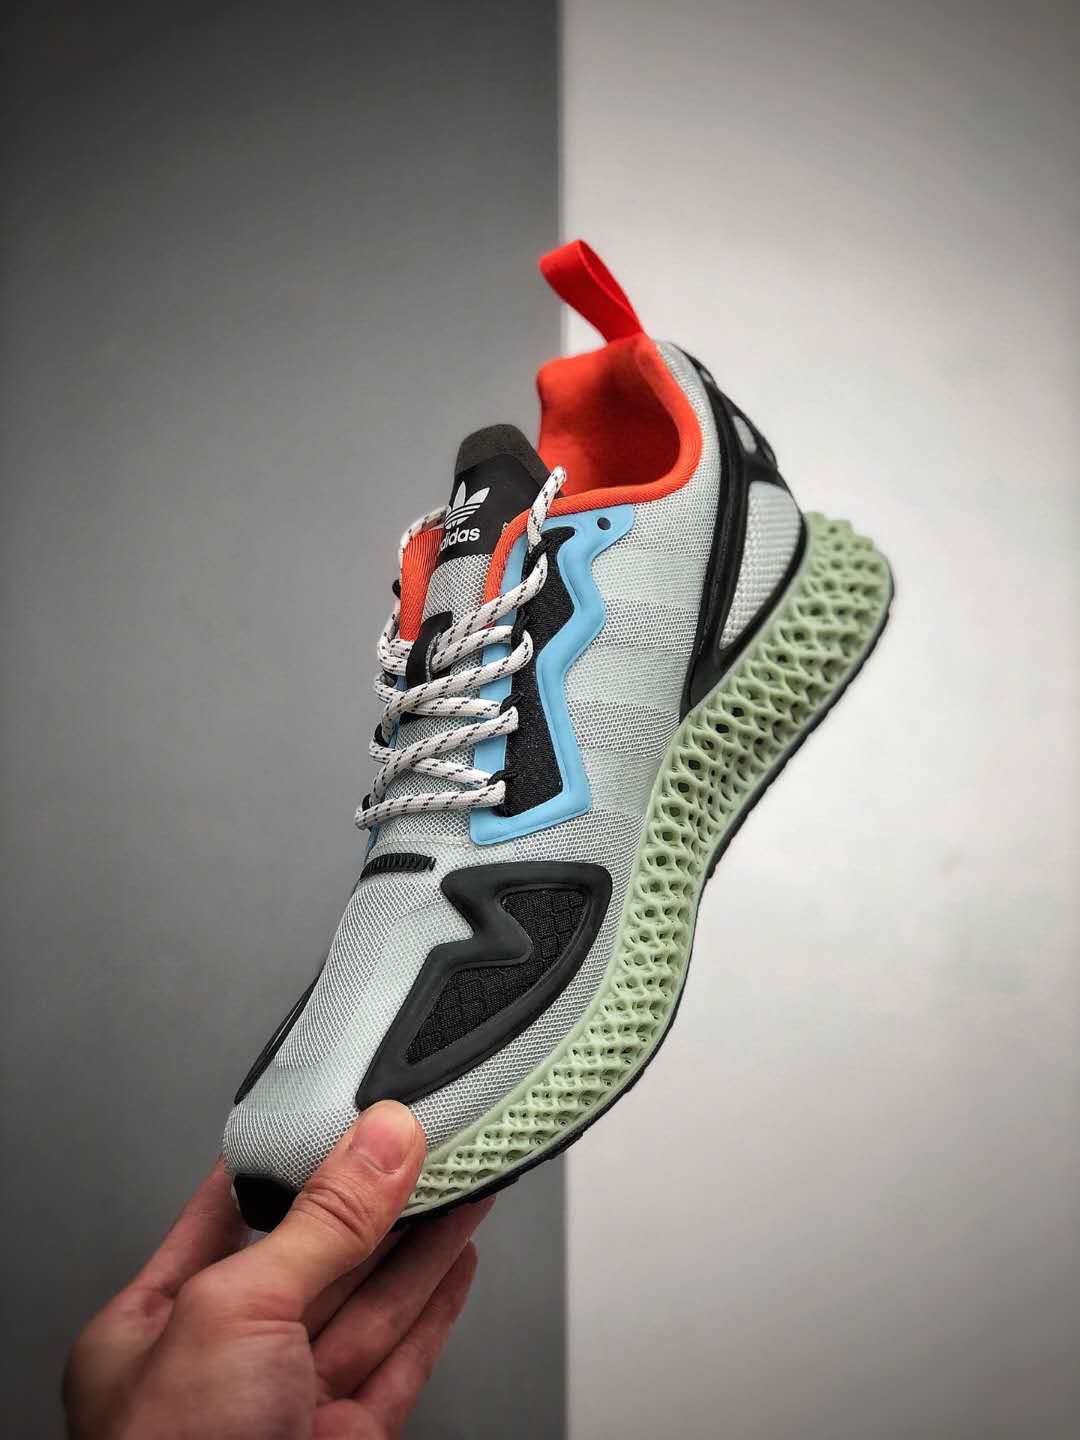 Adidas ZX 2K 4D Dash Green FV8500 - Shop the Latest Athletic Sneakers